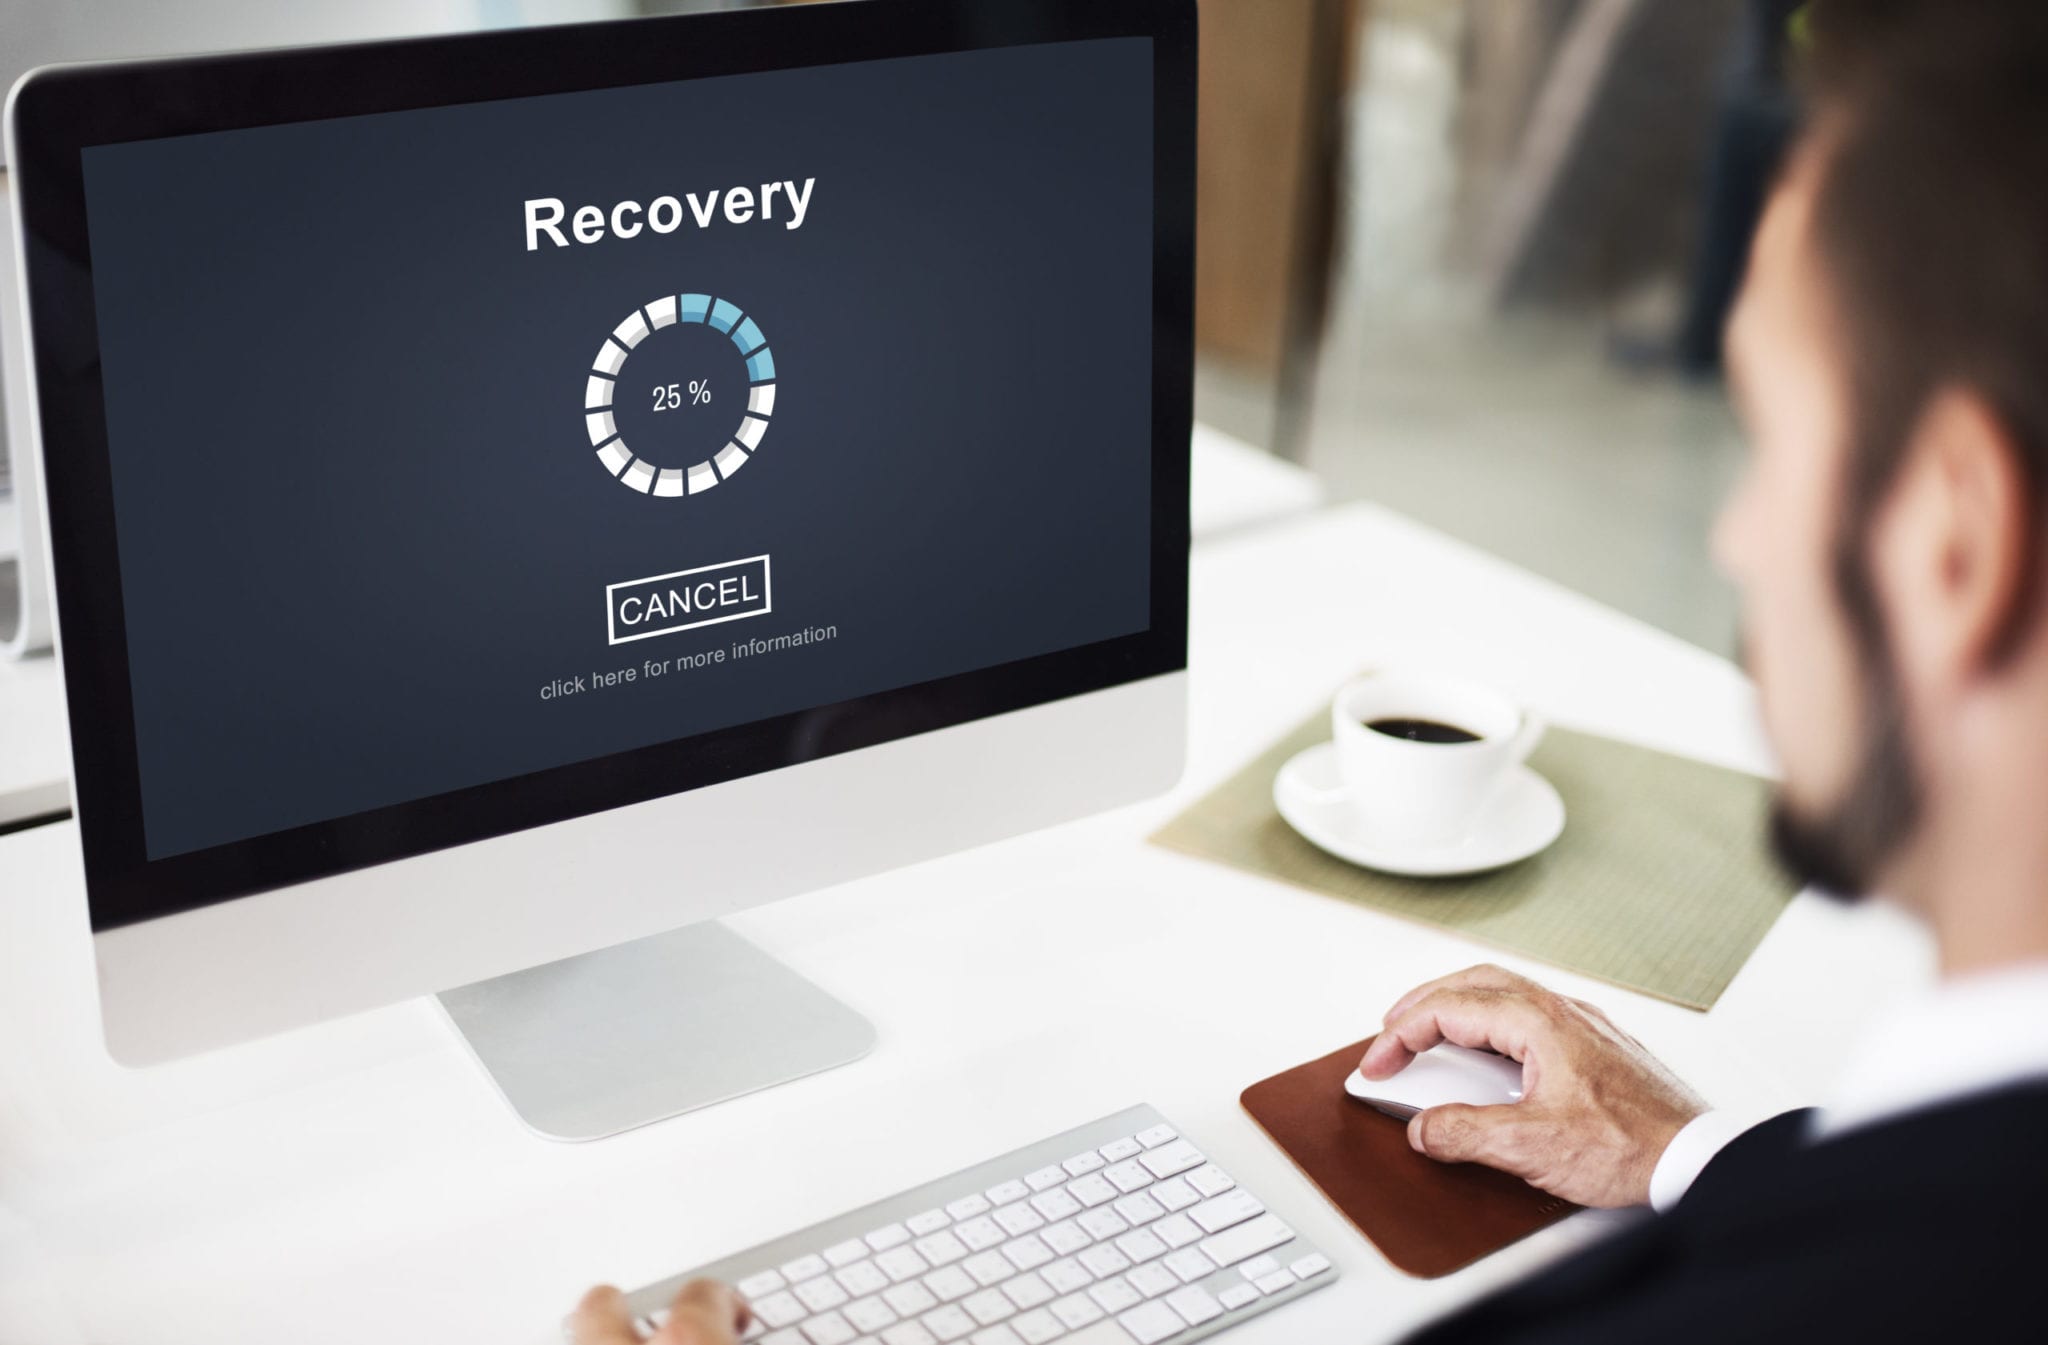 The Complete Guide to Data Recovery: What to Do When You Lose Your Files